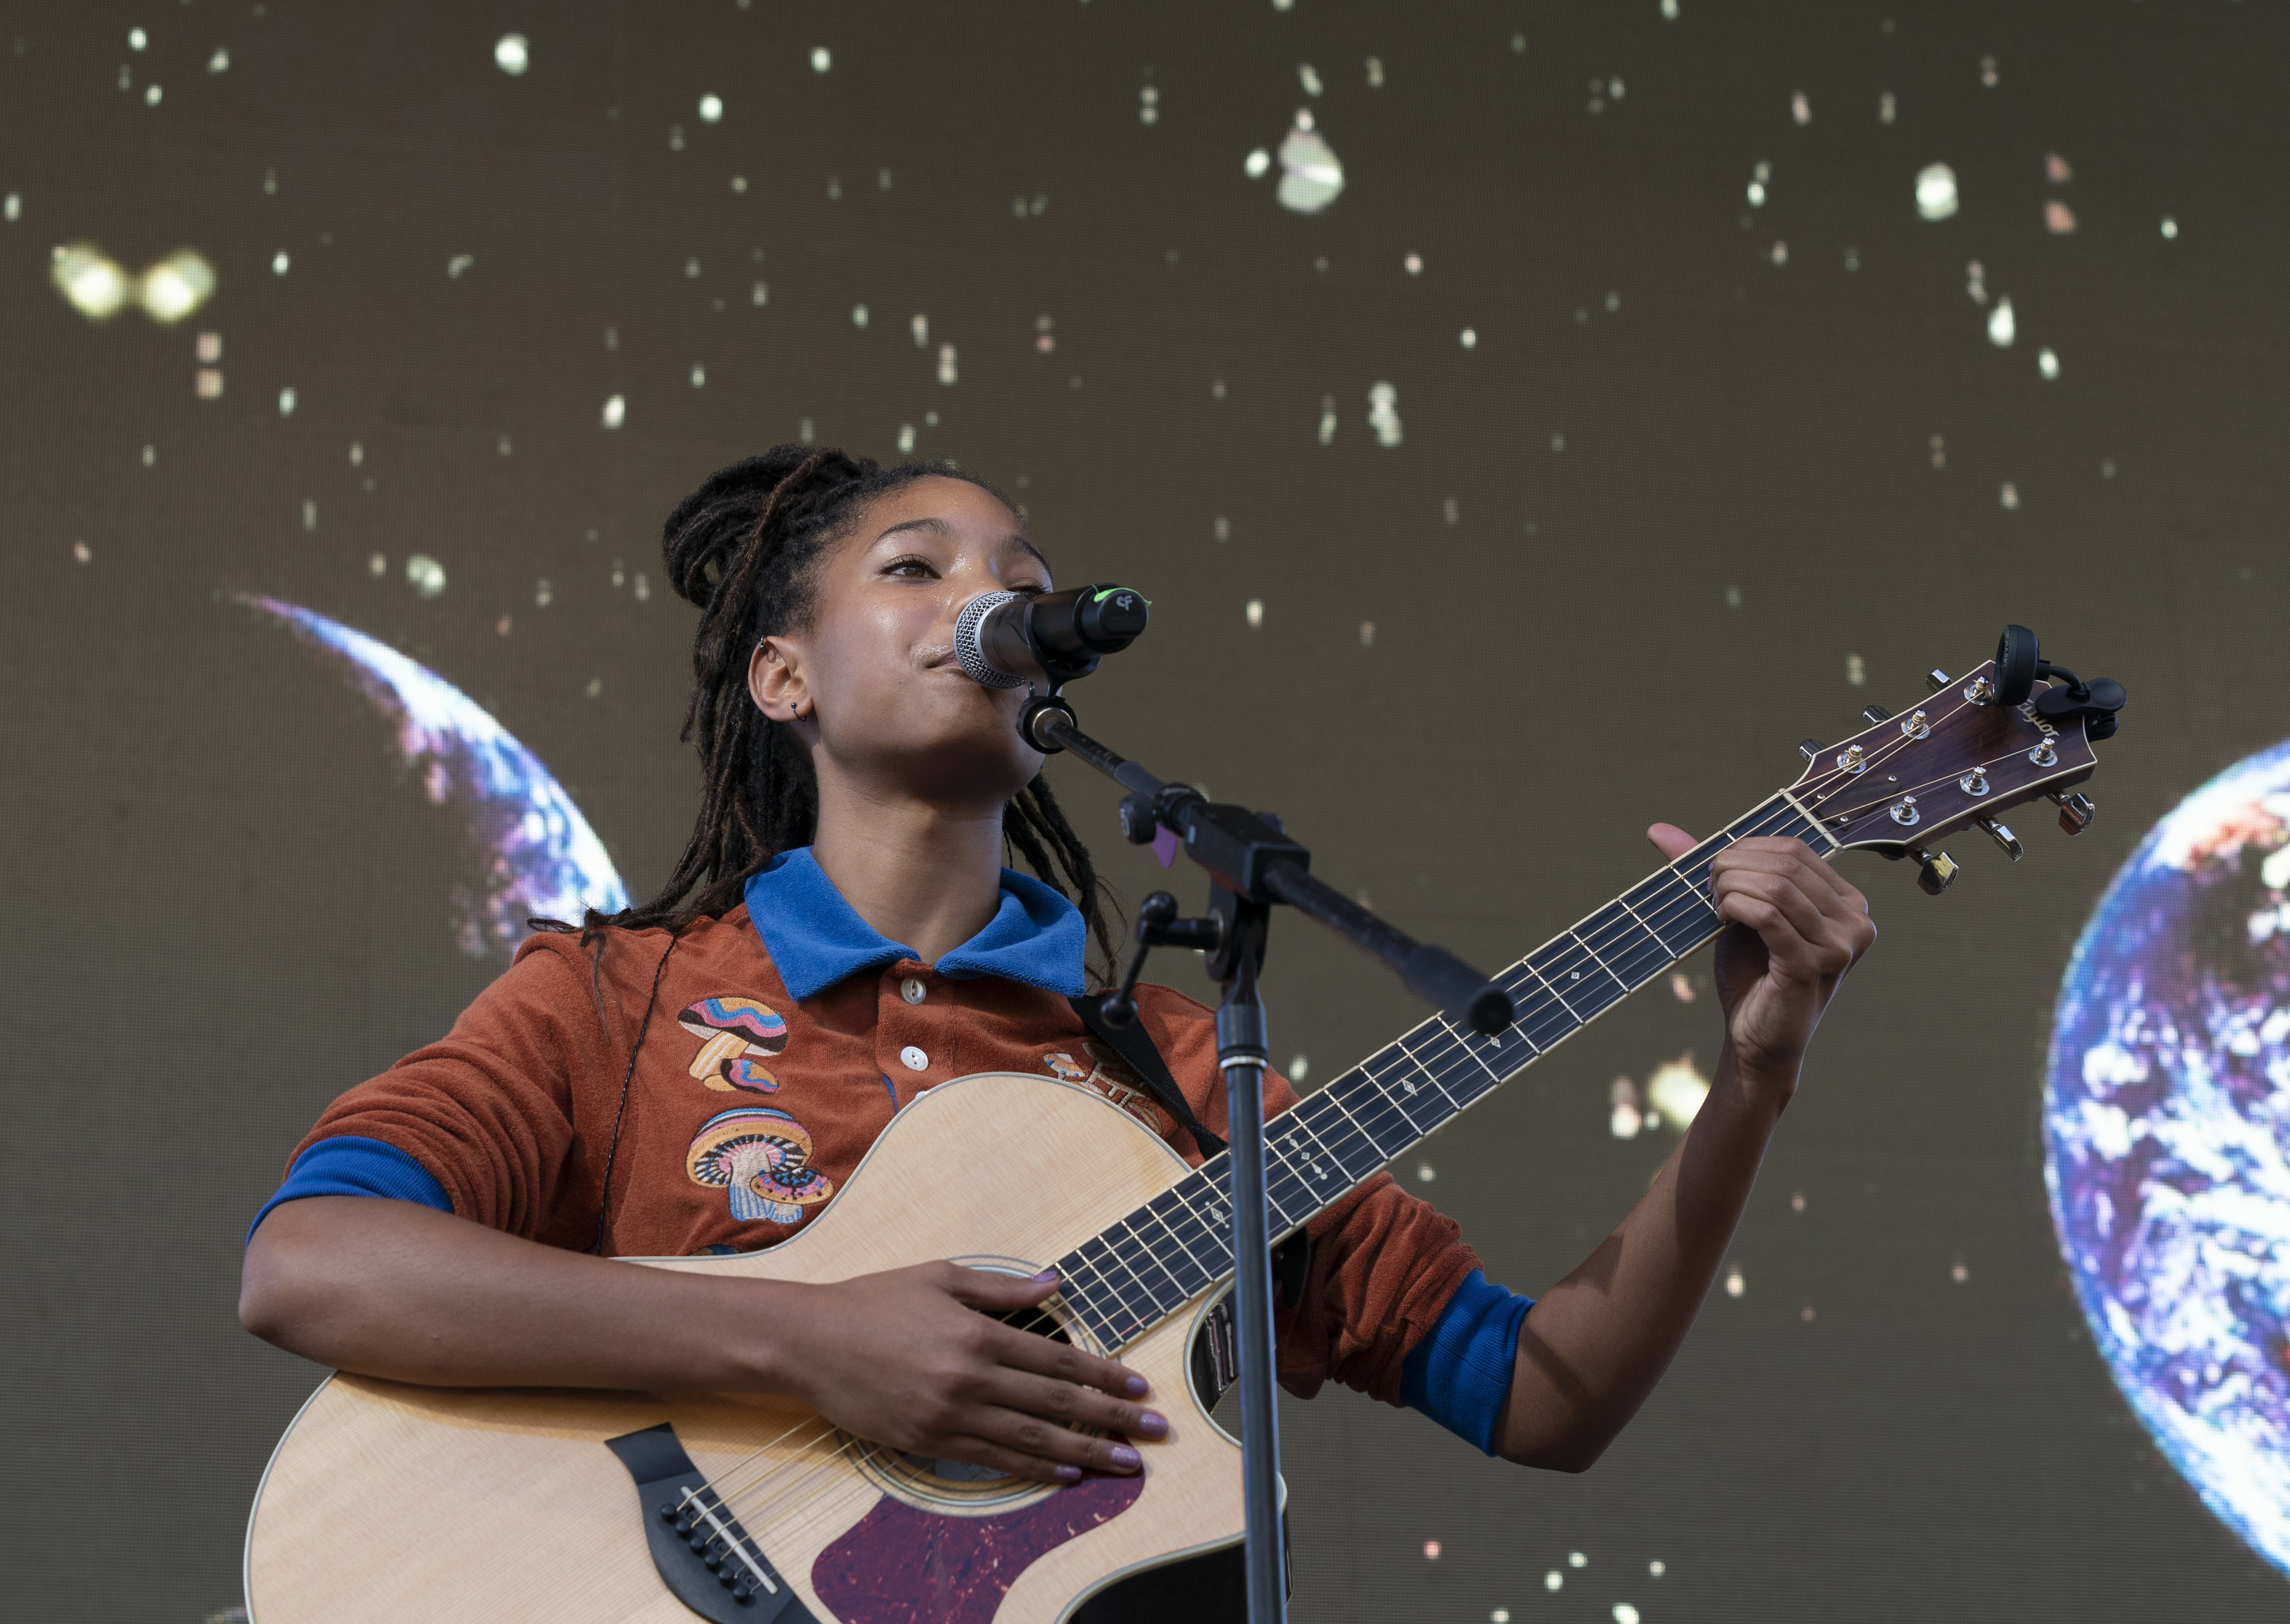 Willow singing onstage with a guitar and a view of space as a backdrop